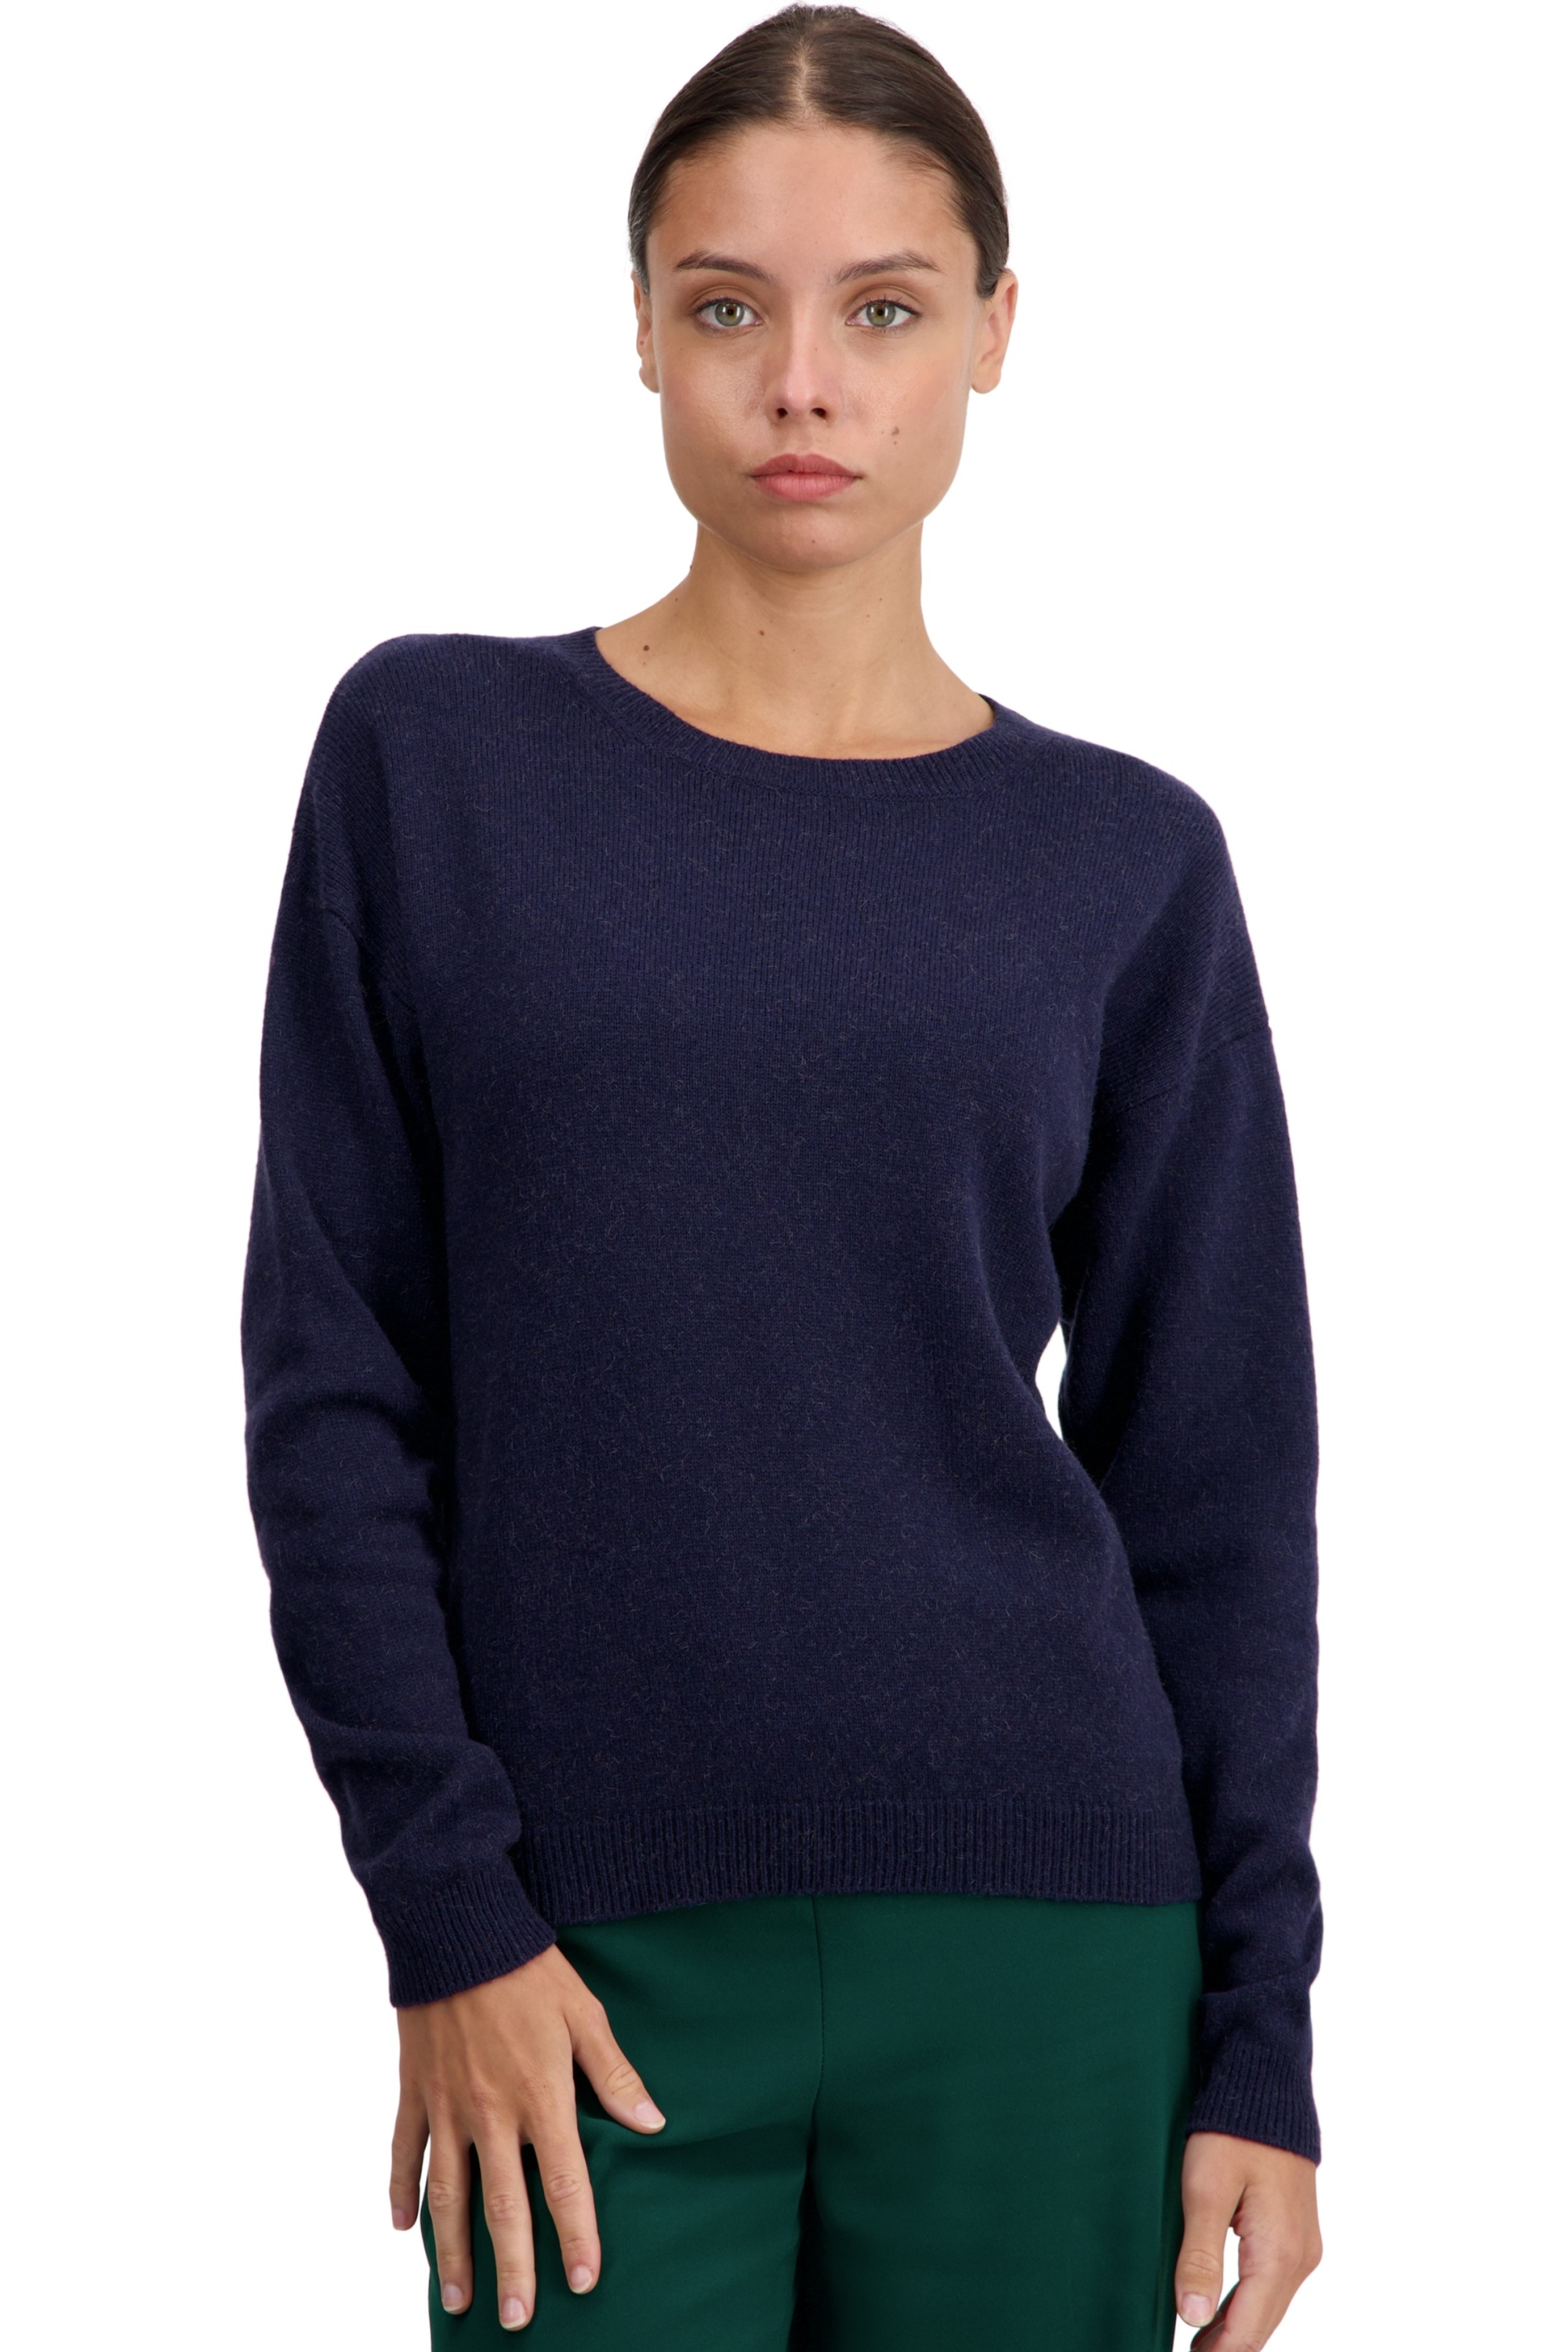 Chameau pull femme col rond thelma marine s